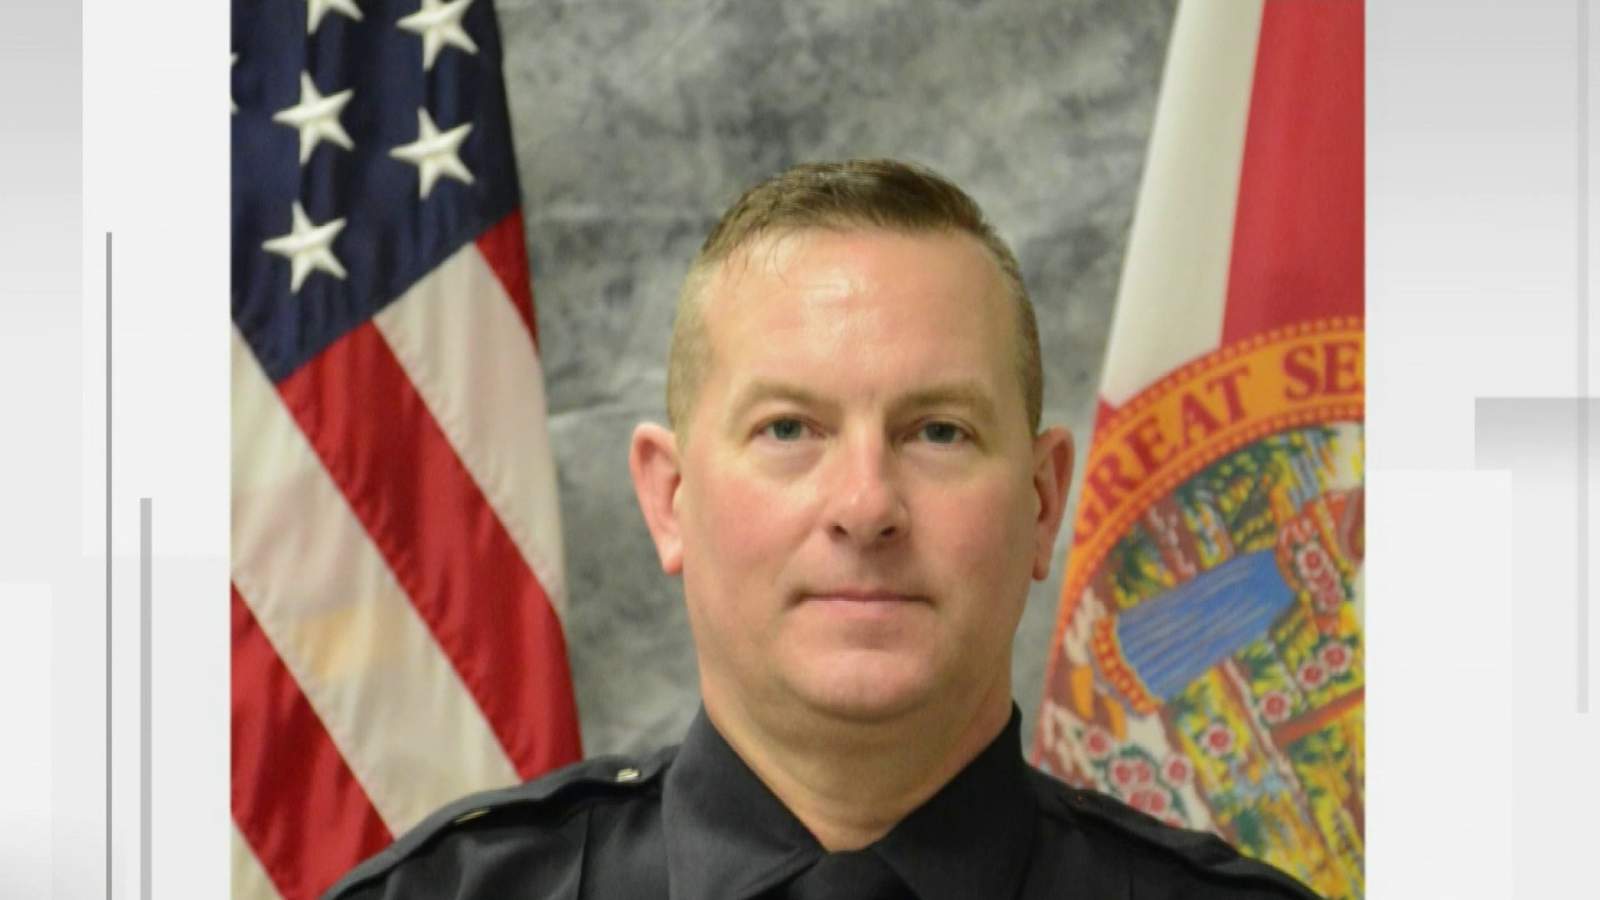 Clermont police officer dies after complications from COVID-19